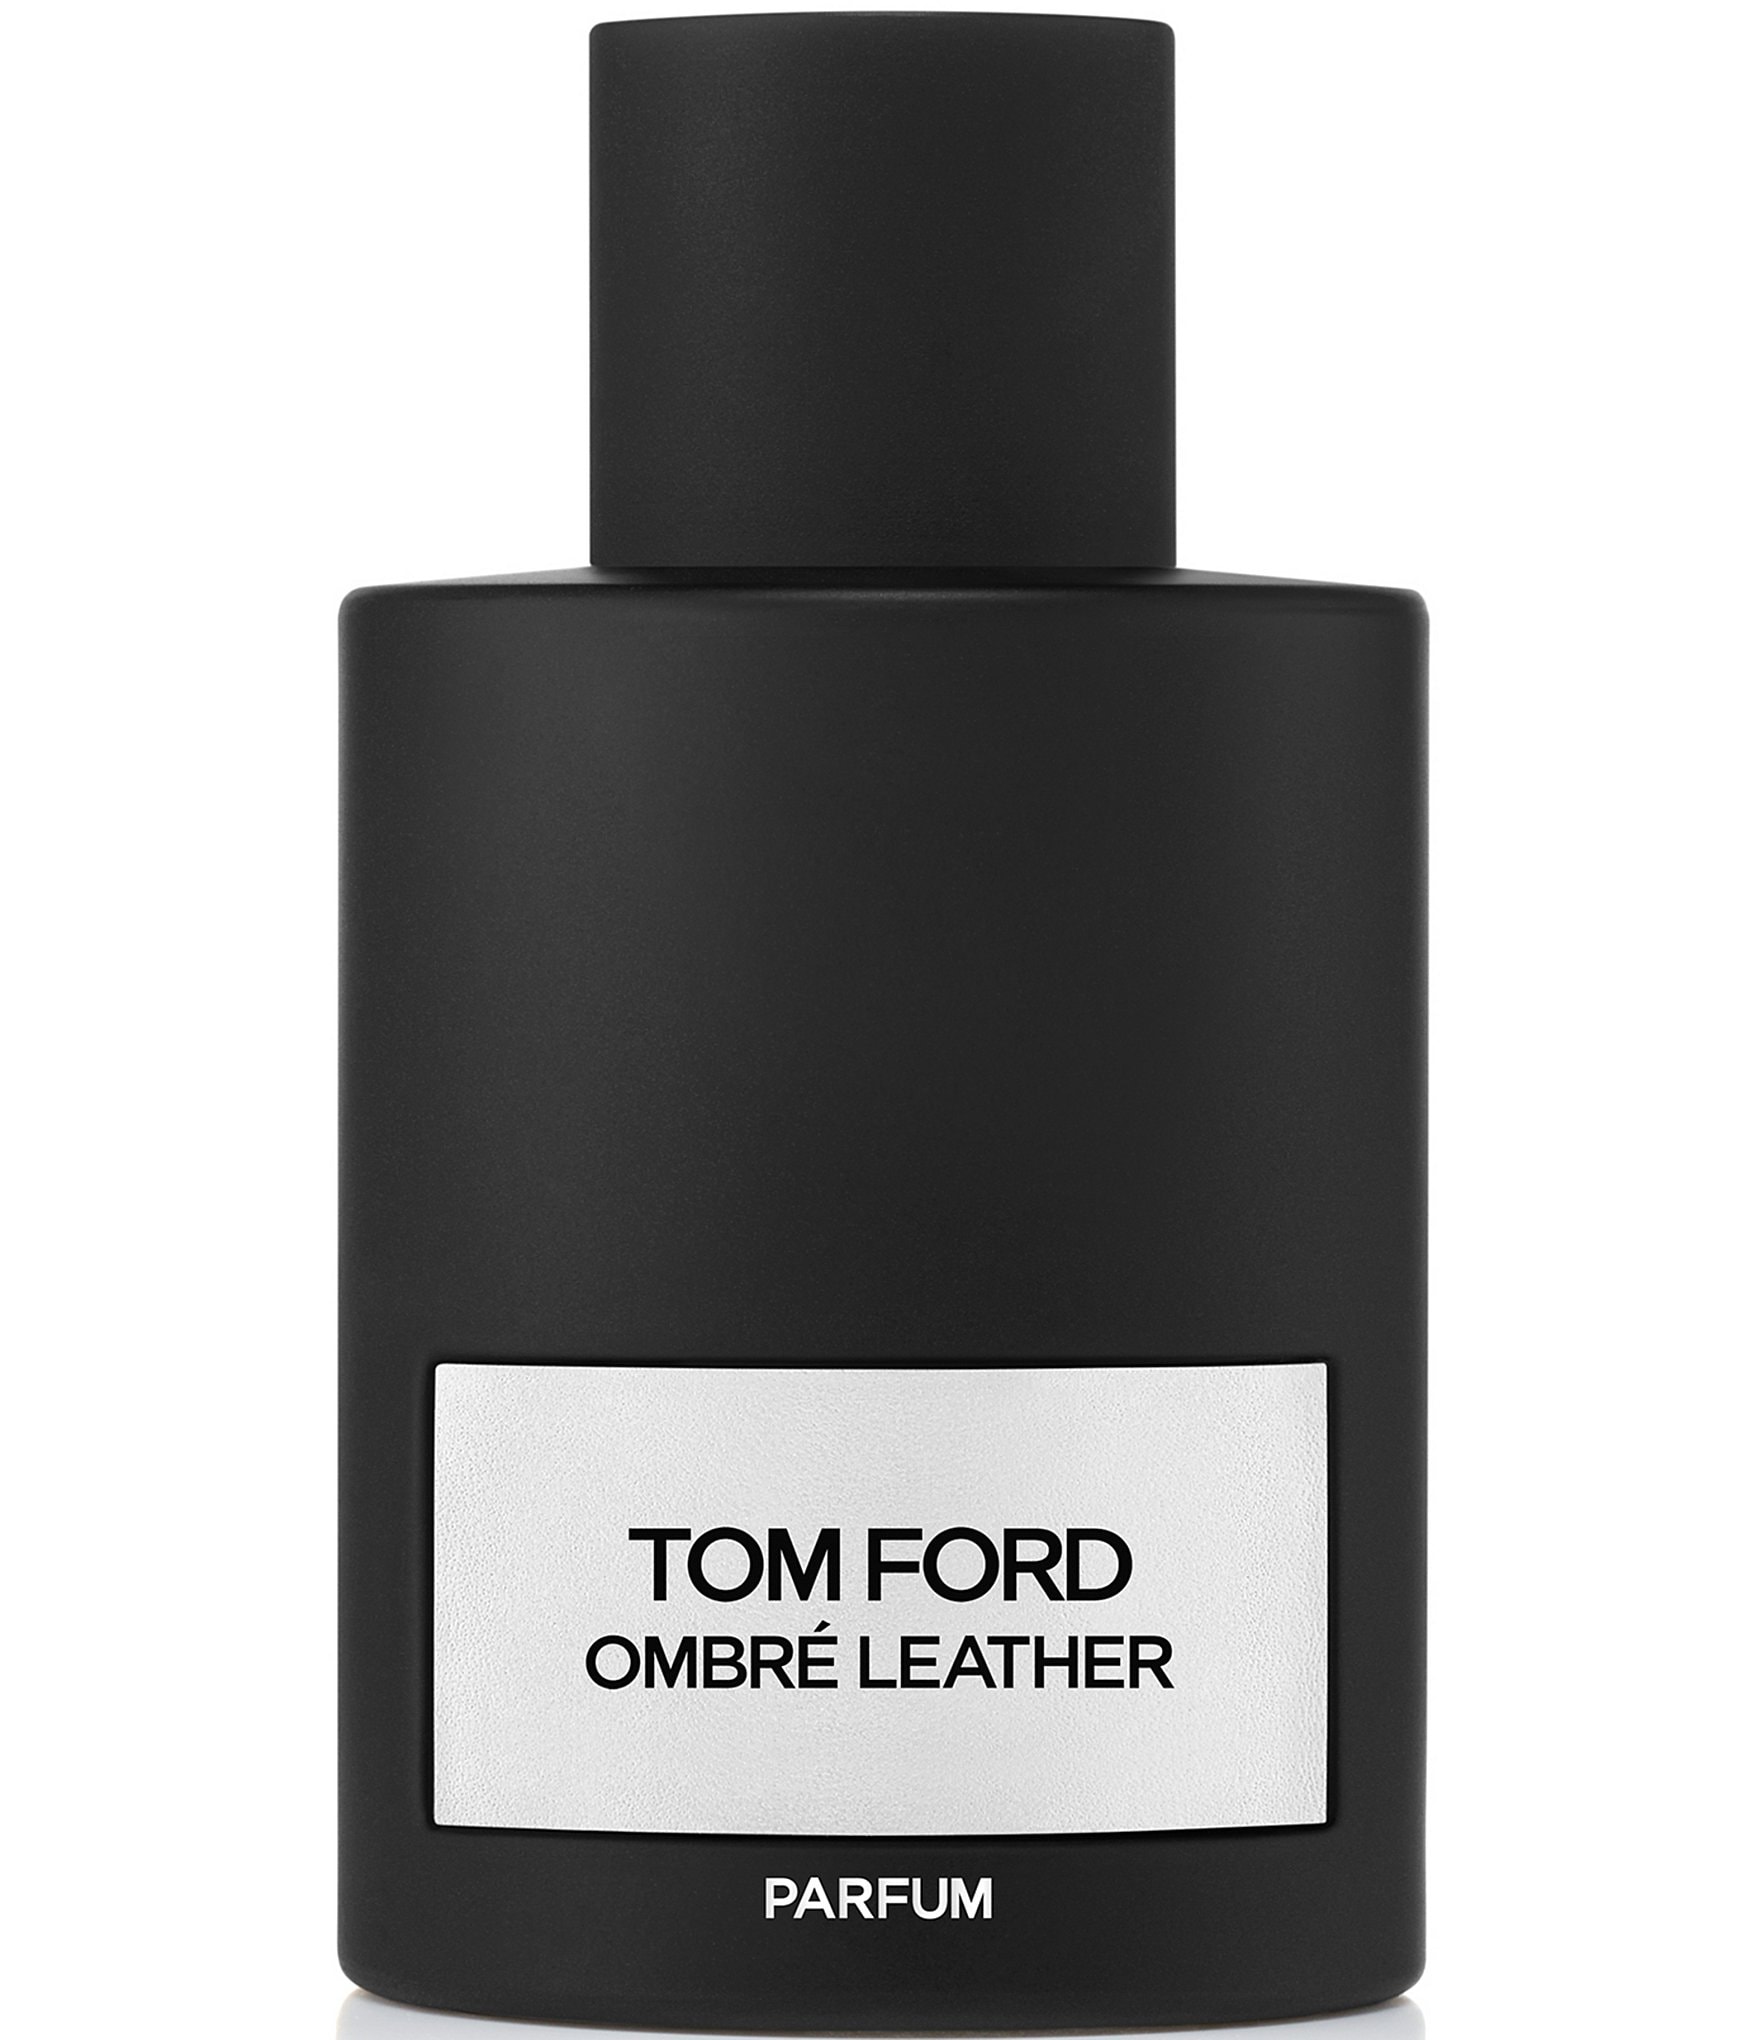 Top 87+ imagen tom ford ombre leather cologne review - Abzlocal.mx